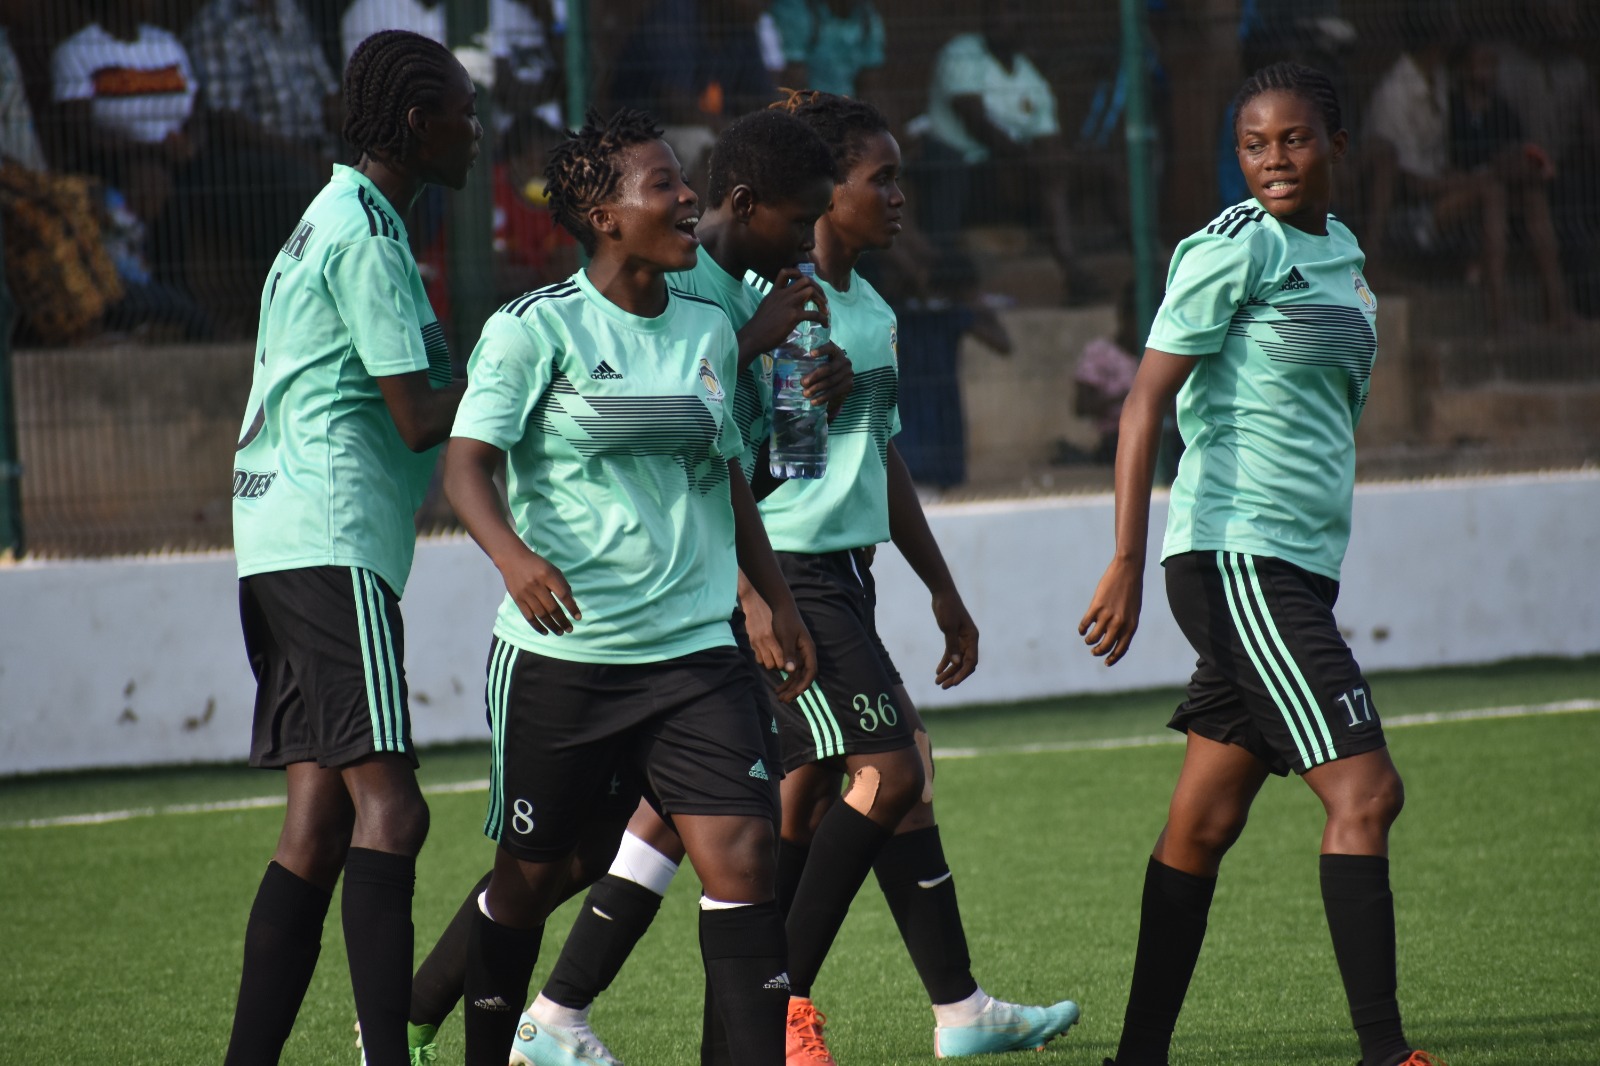 Malta Guinness WPL: Army Ladies stop Hasaacas Ladies in Accra – Southern zone Review